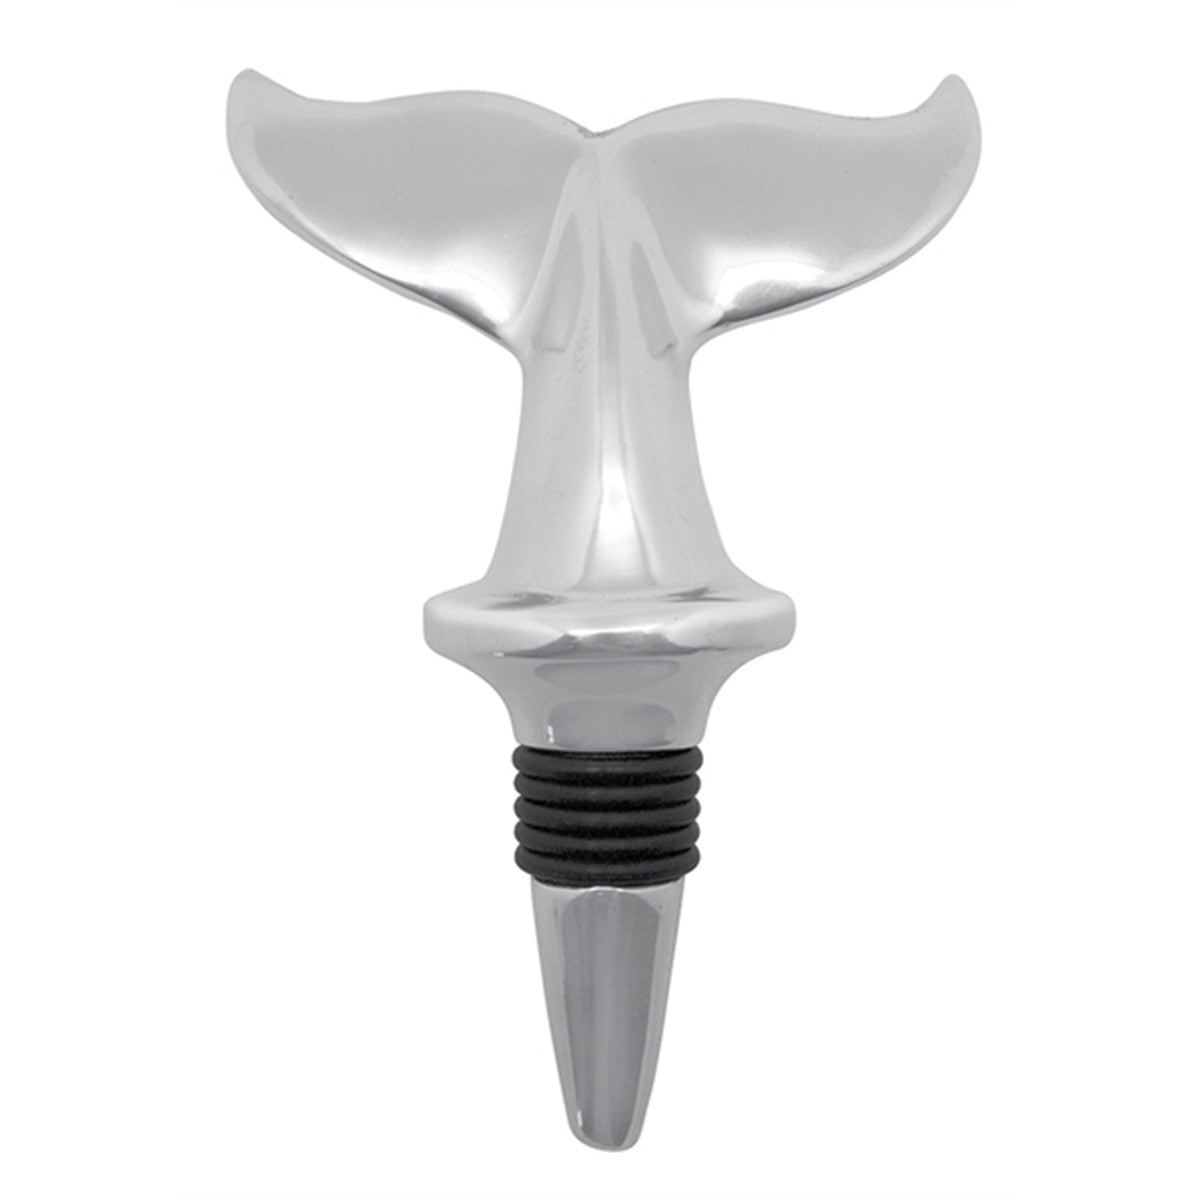 Mariposa Whale's Tail Bottle Stopper